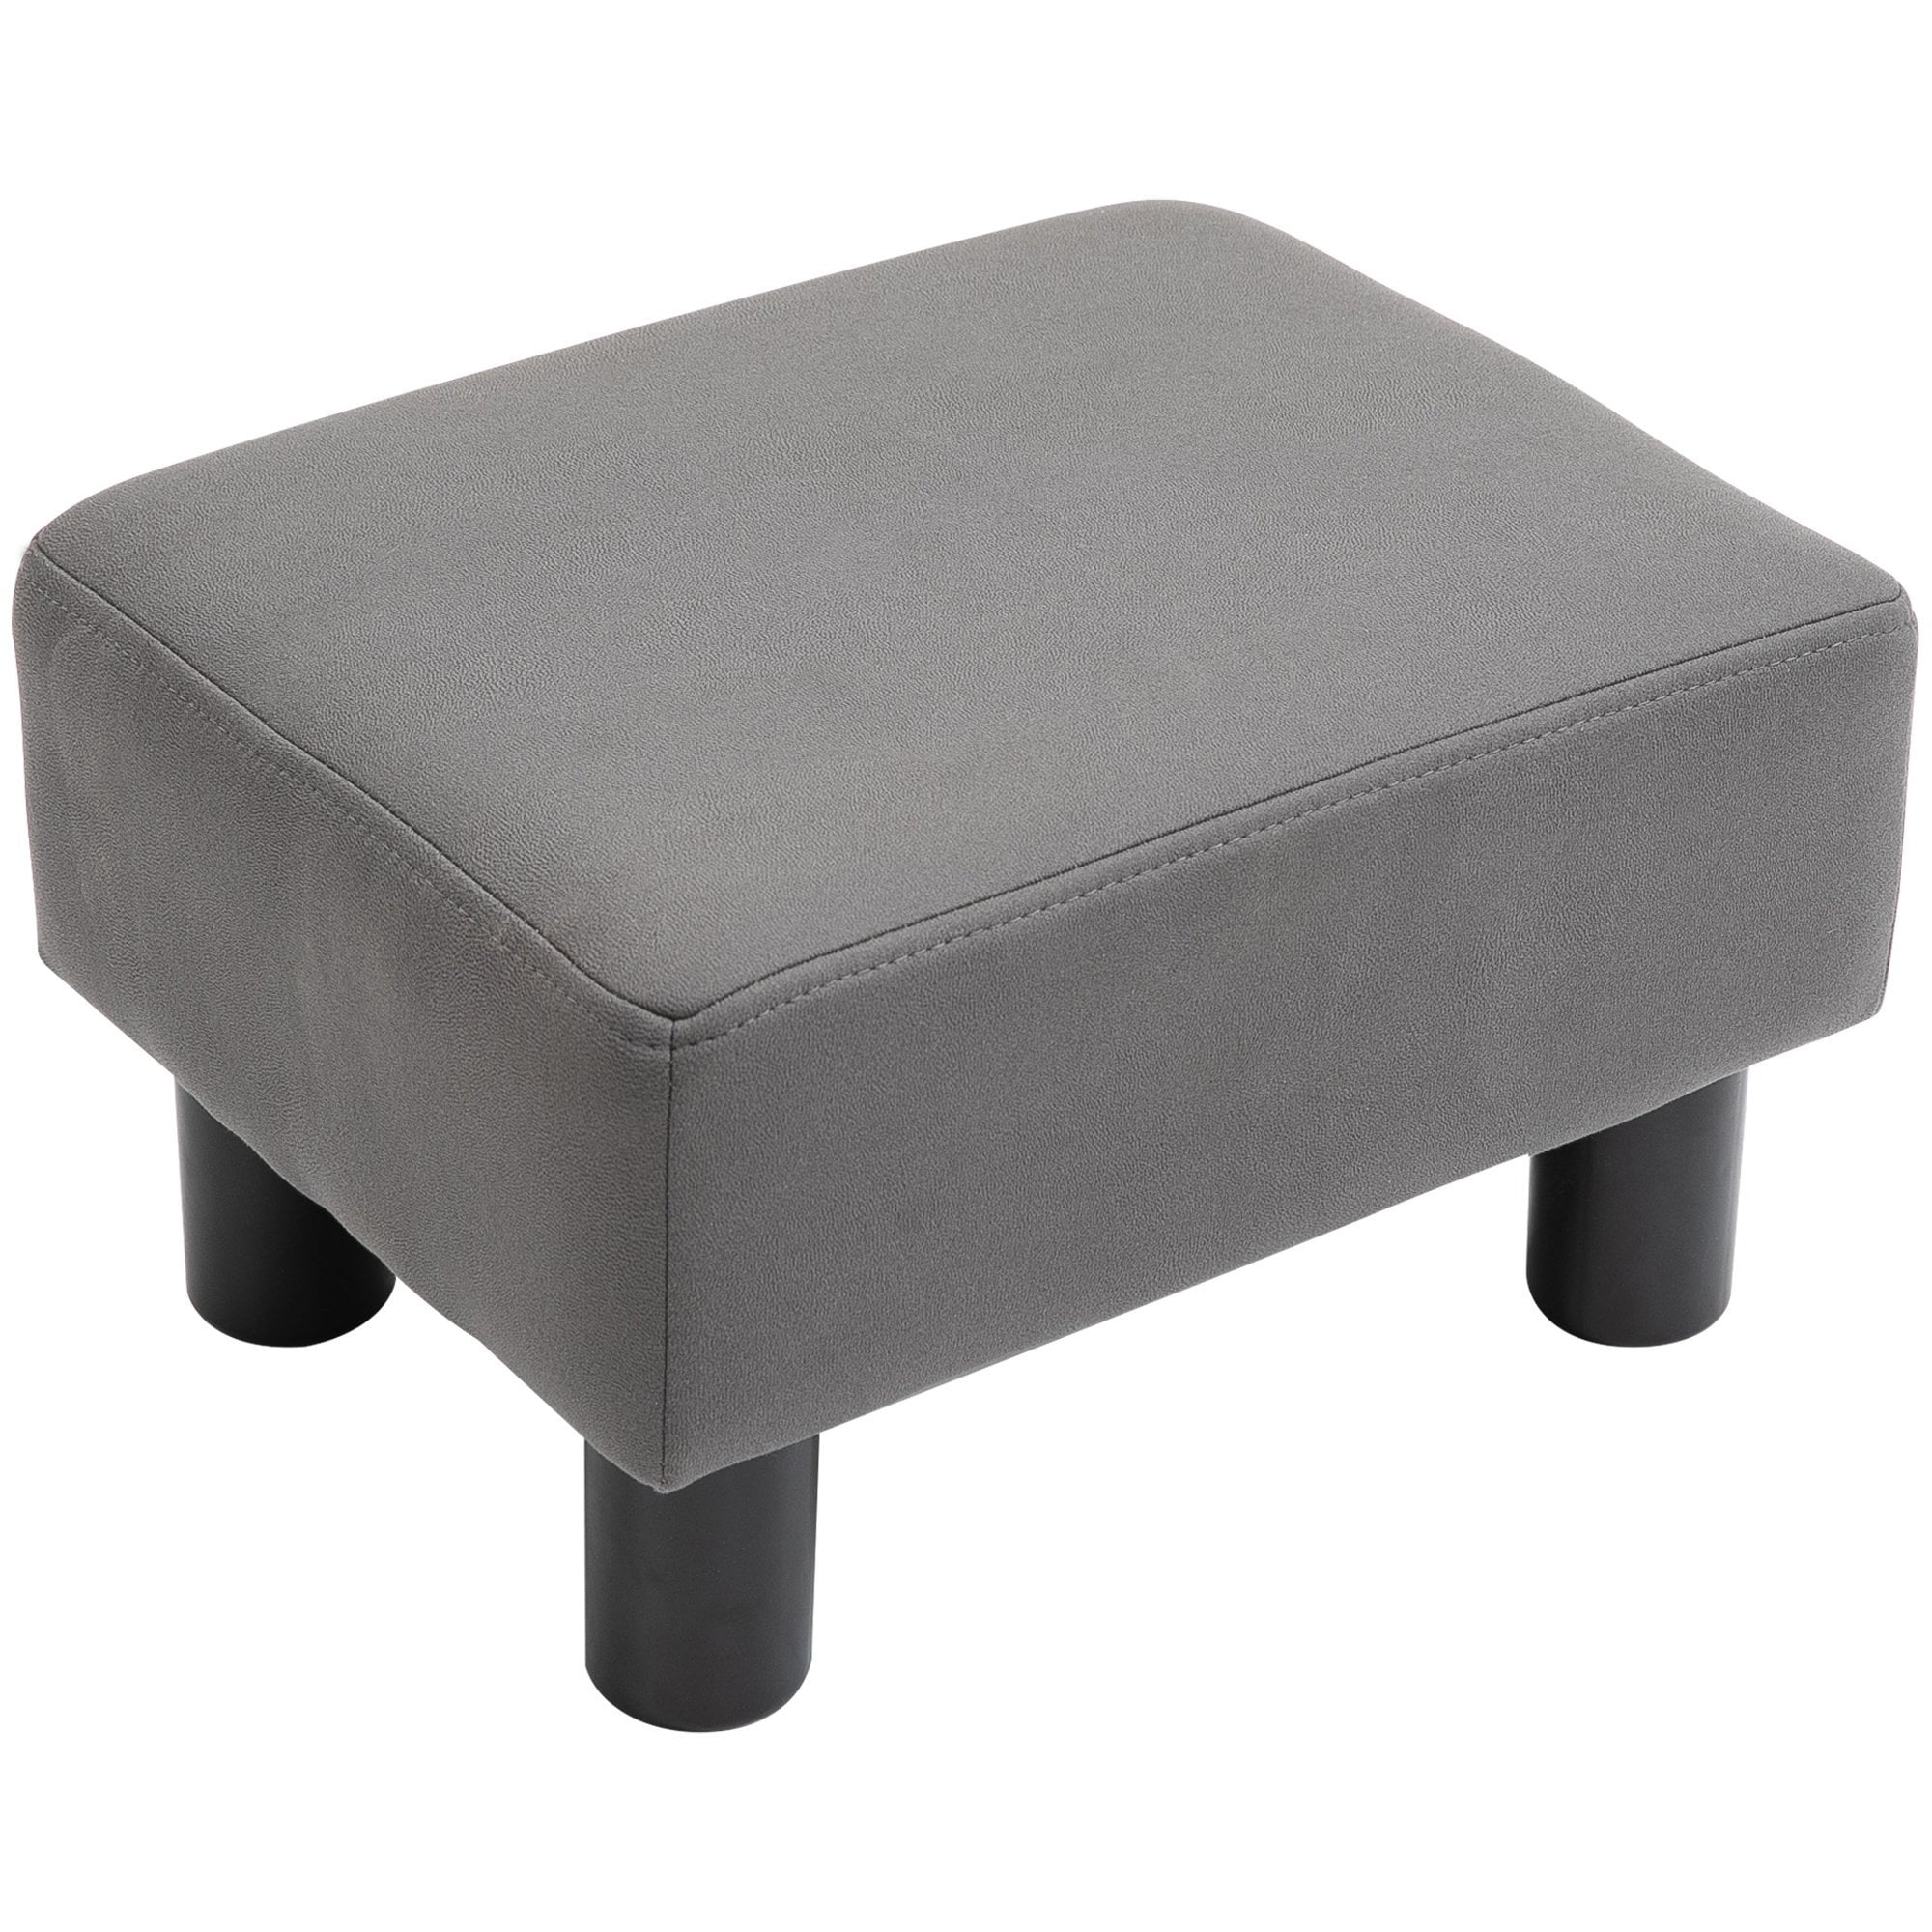 Footstool Foot Rest Small Seat Foot Rest Chair Grey Home Office with Legs 40 x 30 x 24cm Ottoman Footrest Luxury - Home Living  | TJ Hughes